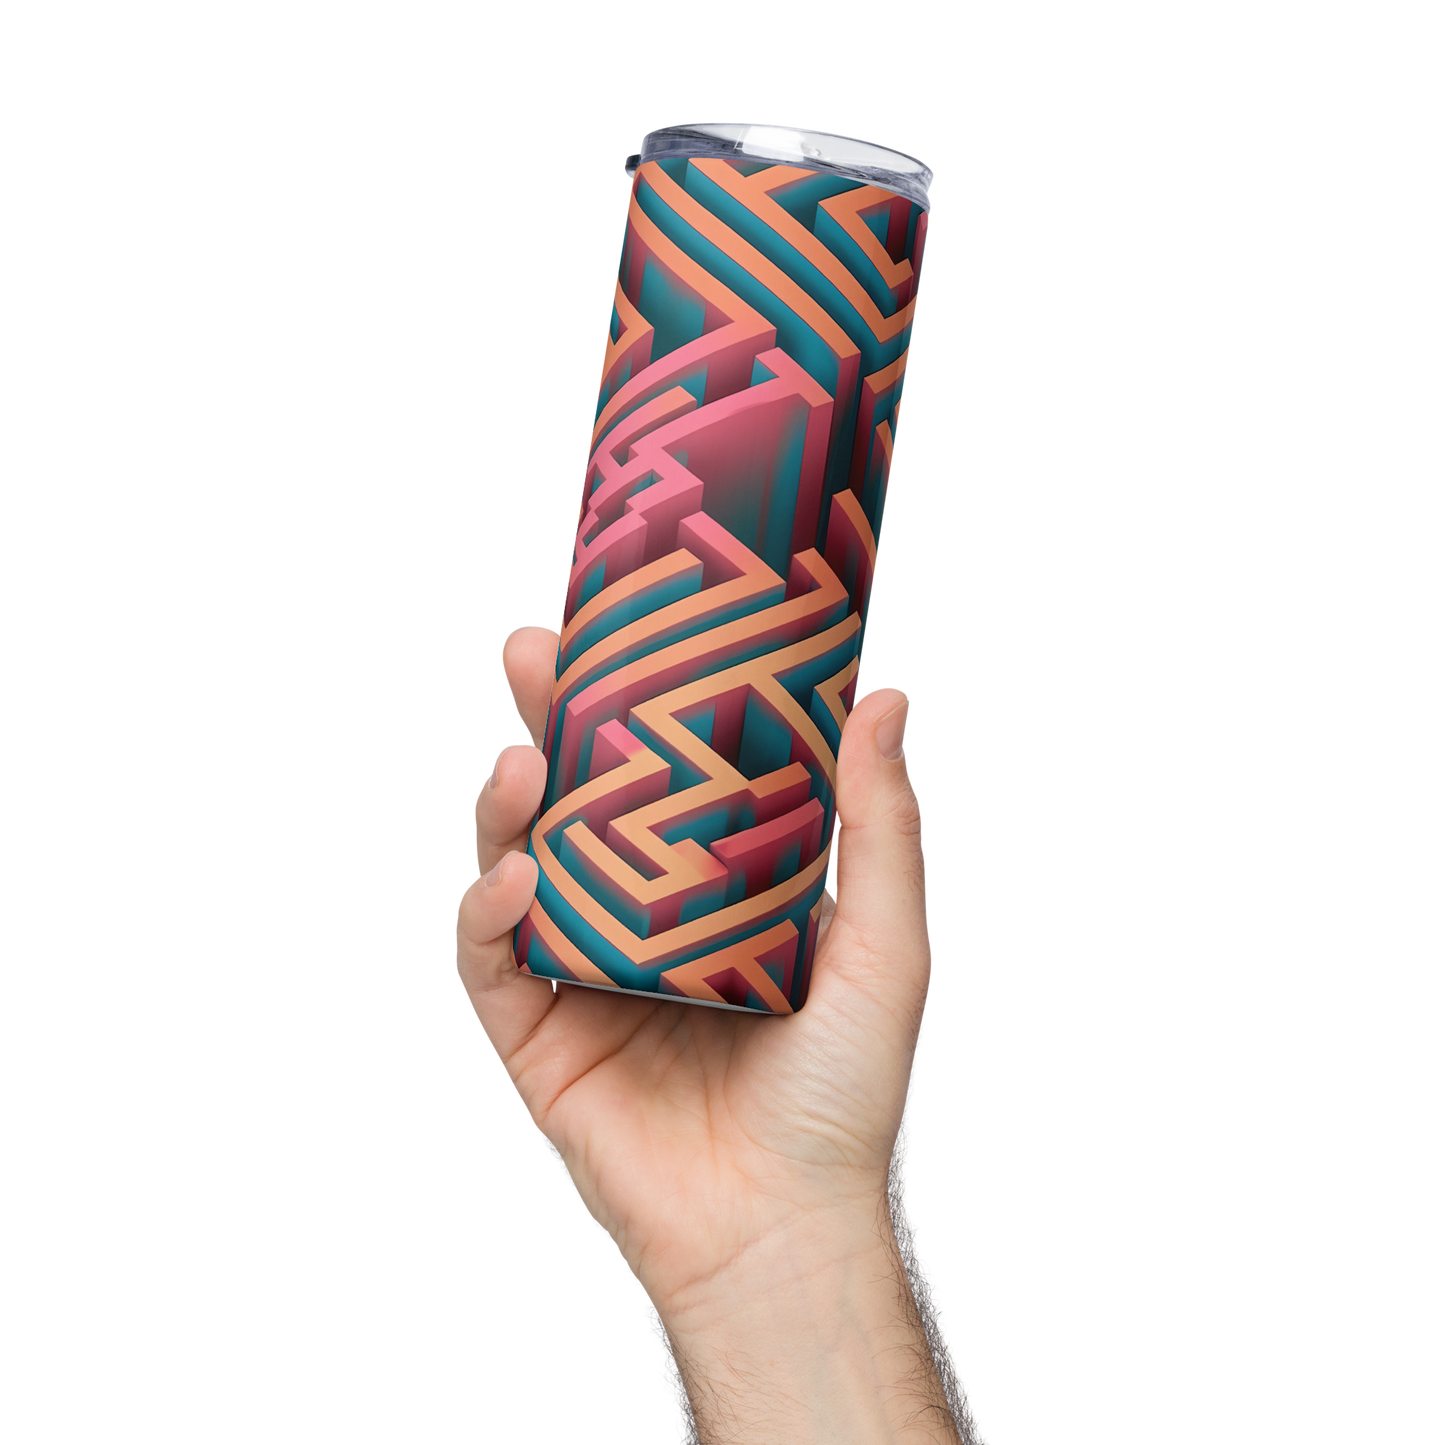 3D Maze Illusion | 3D Patterns | Stainless Steel Tumbler - #1